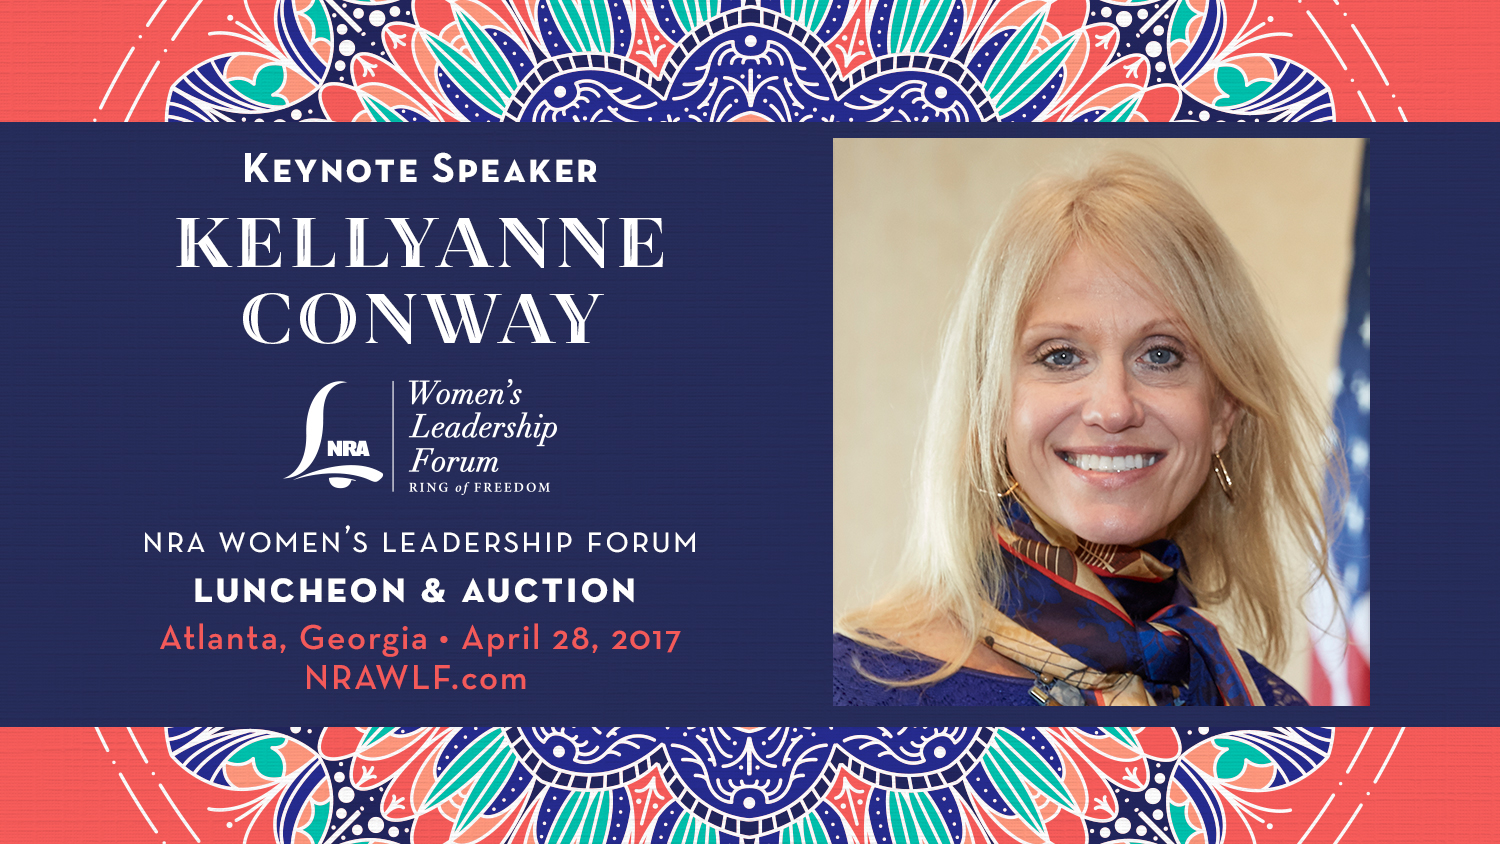 Join us for the 11th annual Women's Leadership Forum and Luncheon